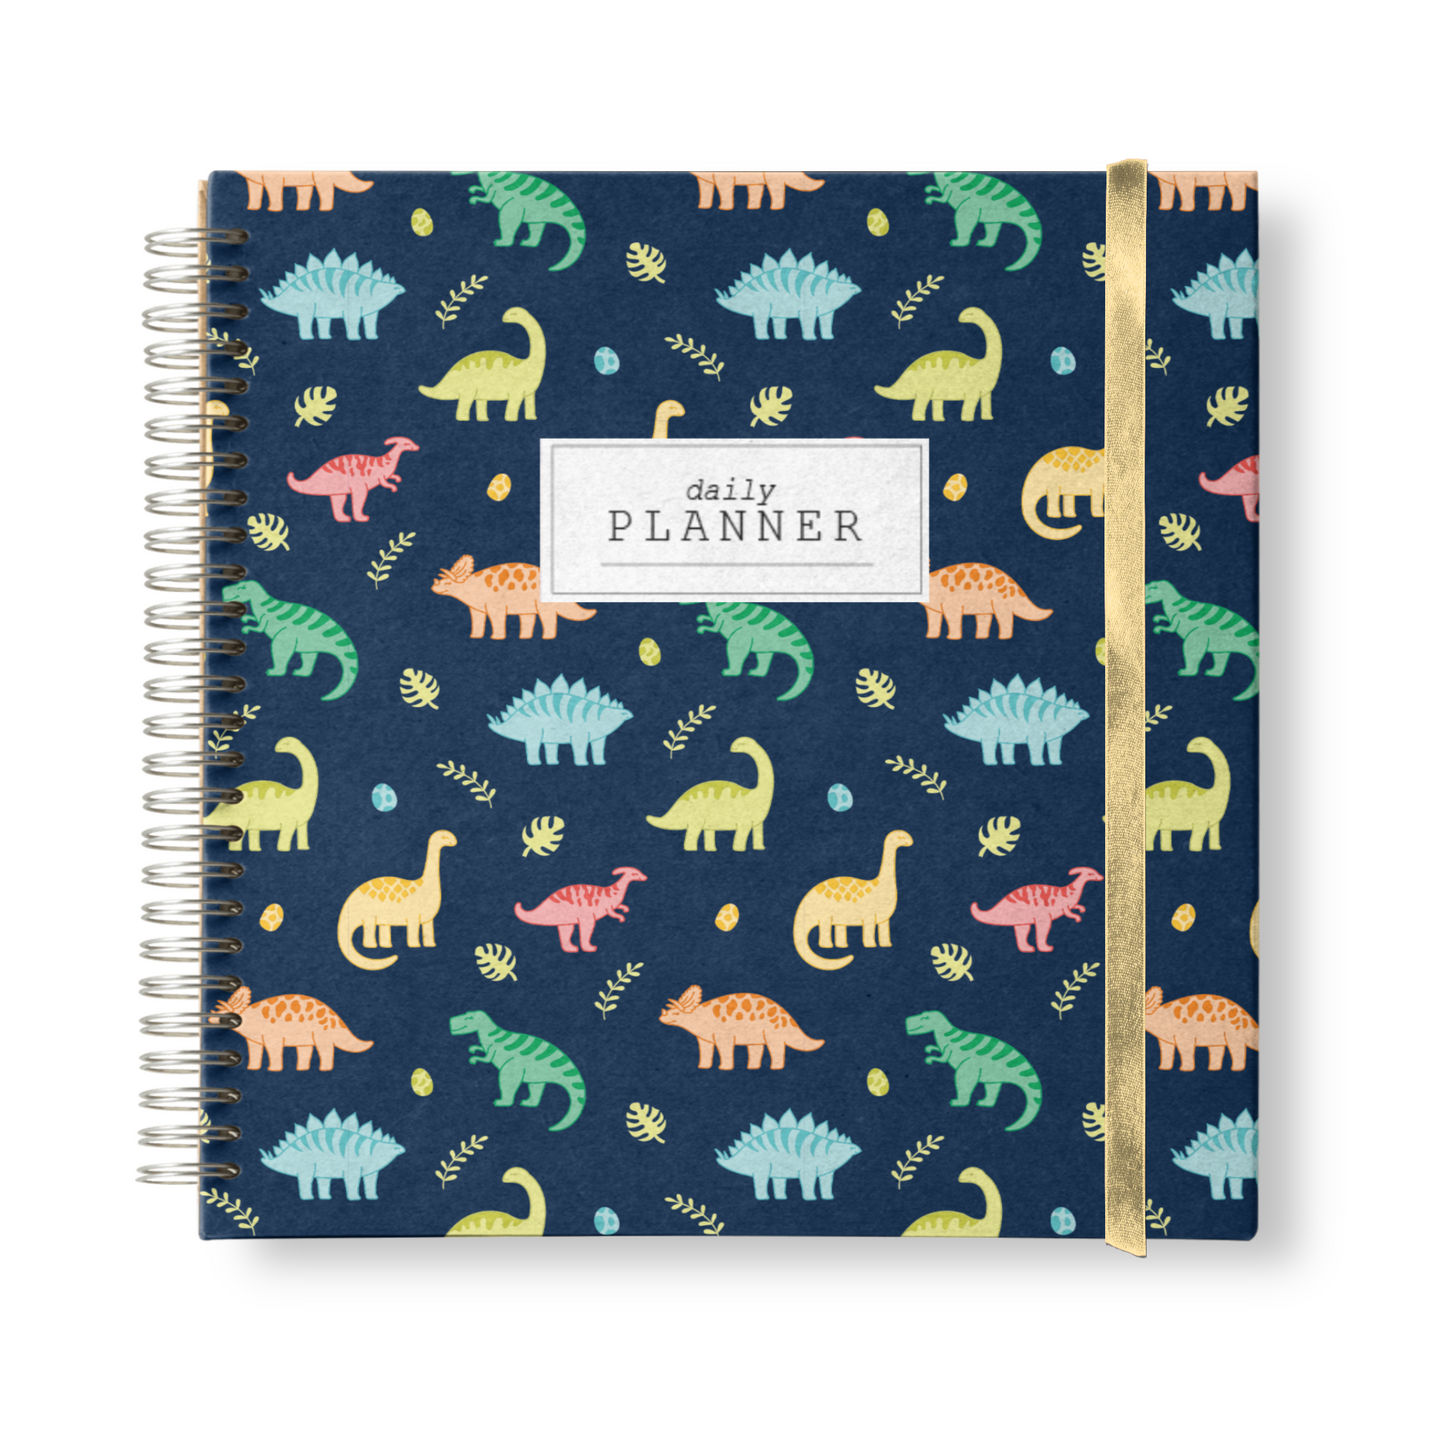 Daily Planner "Dino"